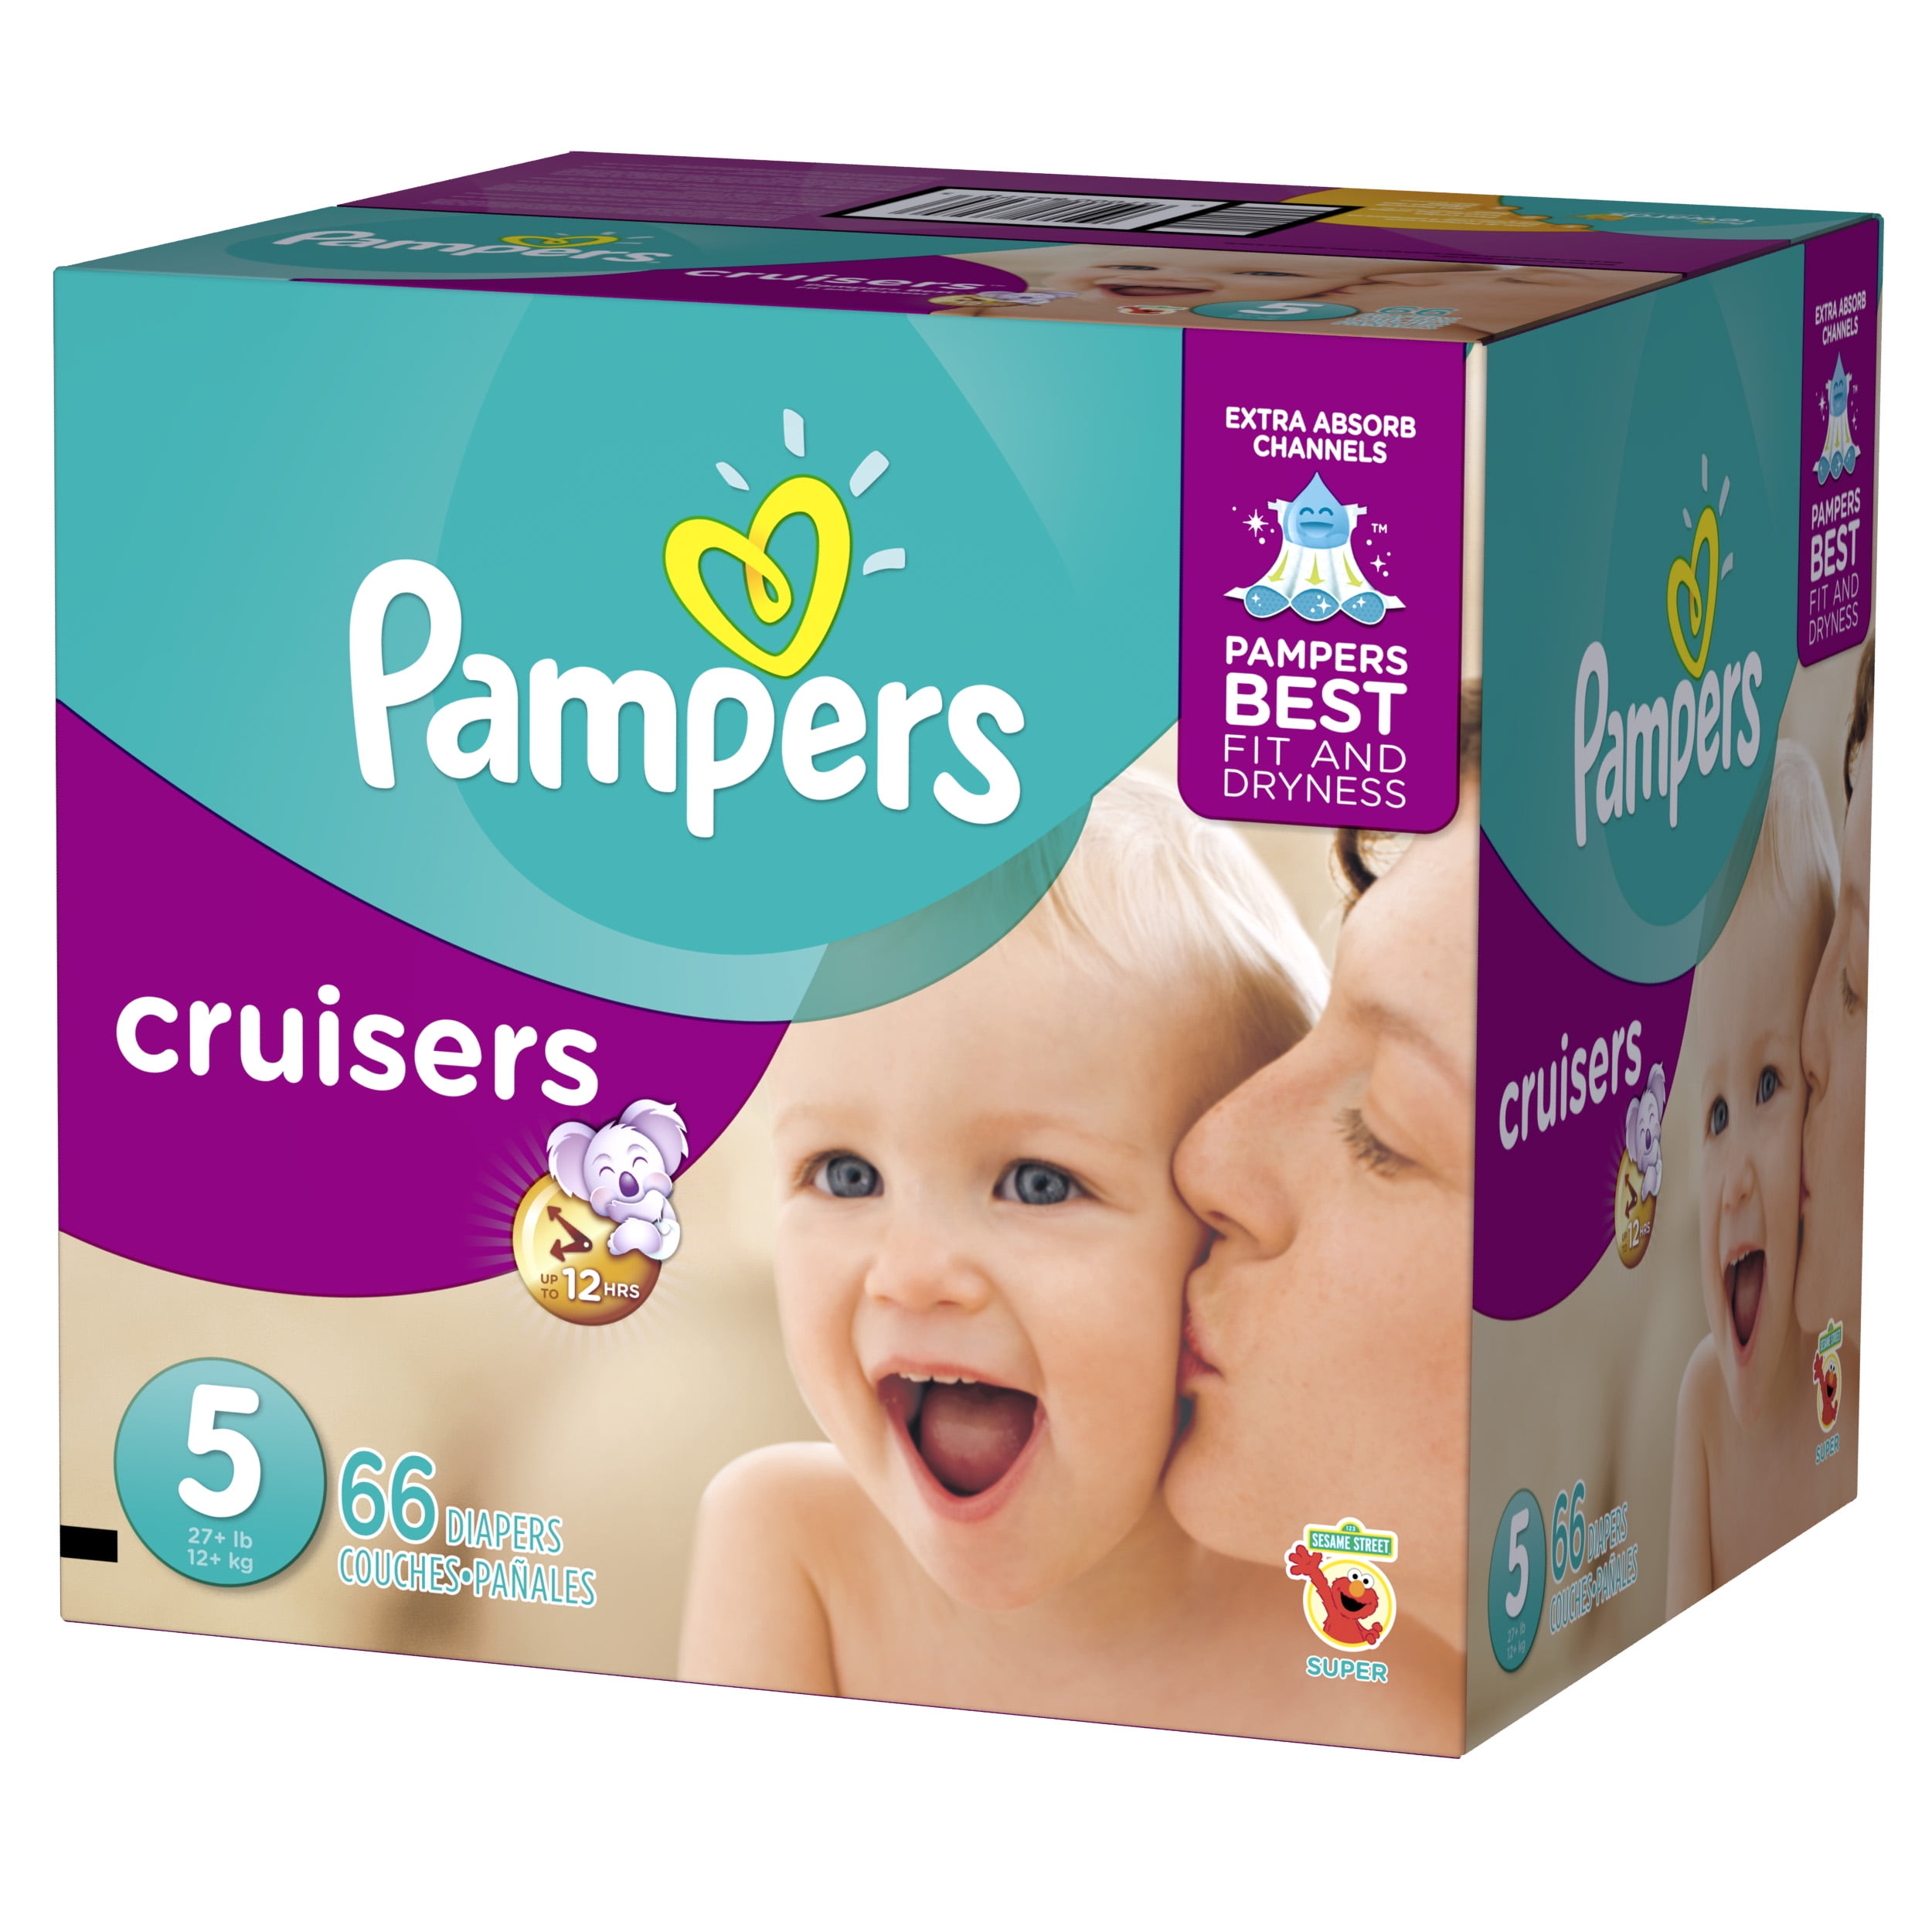 Pampers Cruisers Diapers Size 5 count - Walmart.com